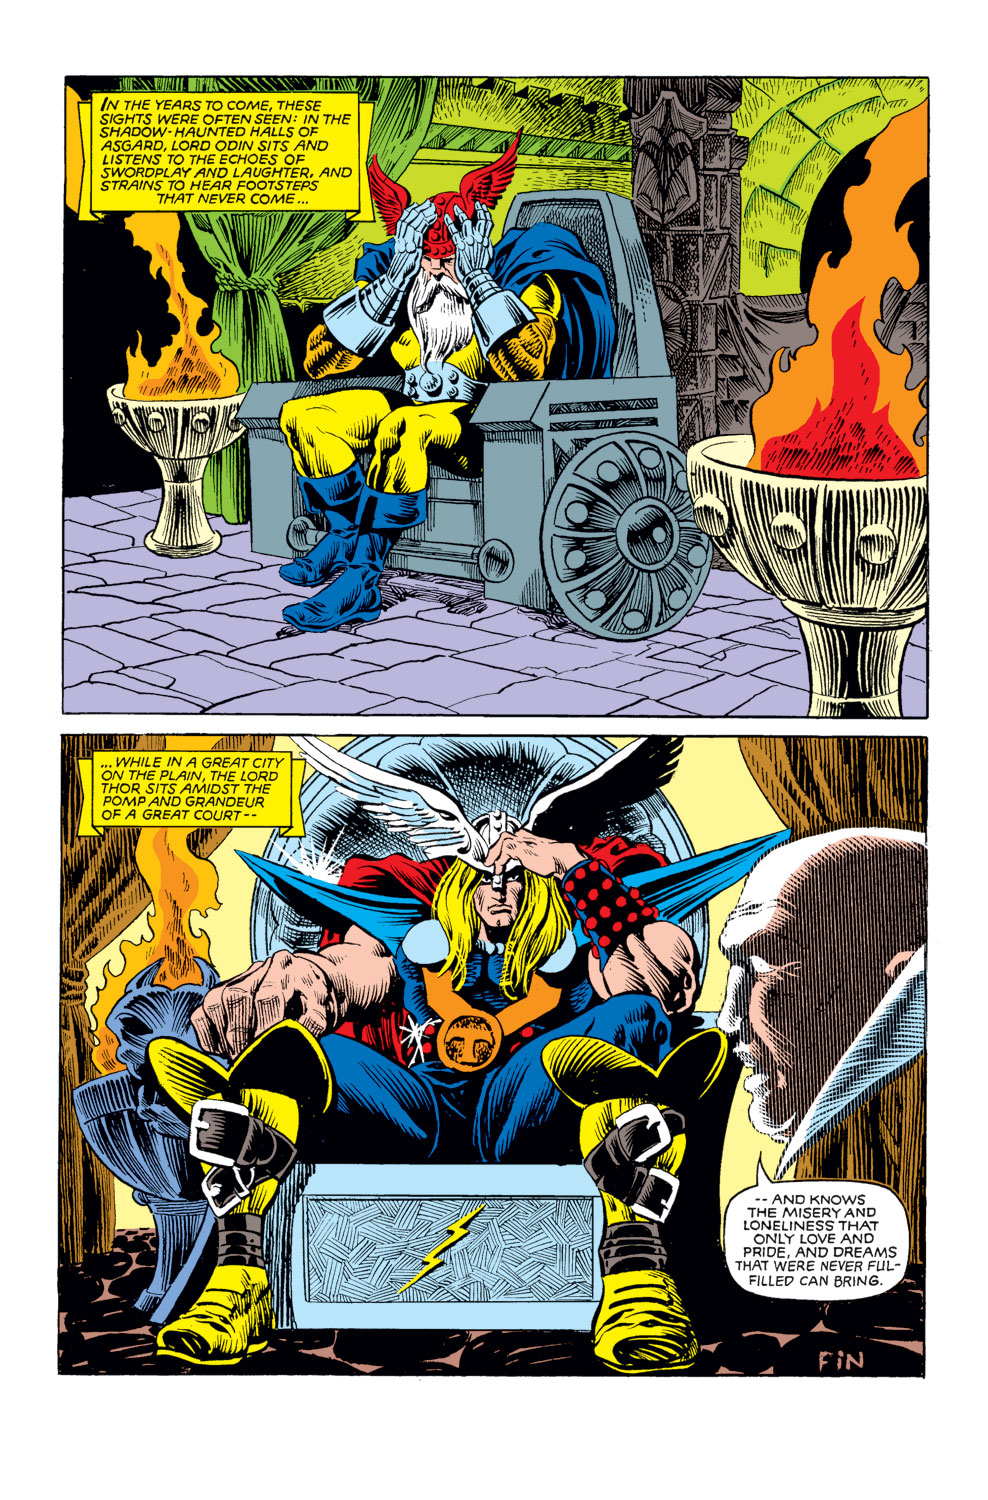 What If? (1977) issue 25 - Thor and the Avengers battled the gods - Page 33